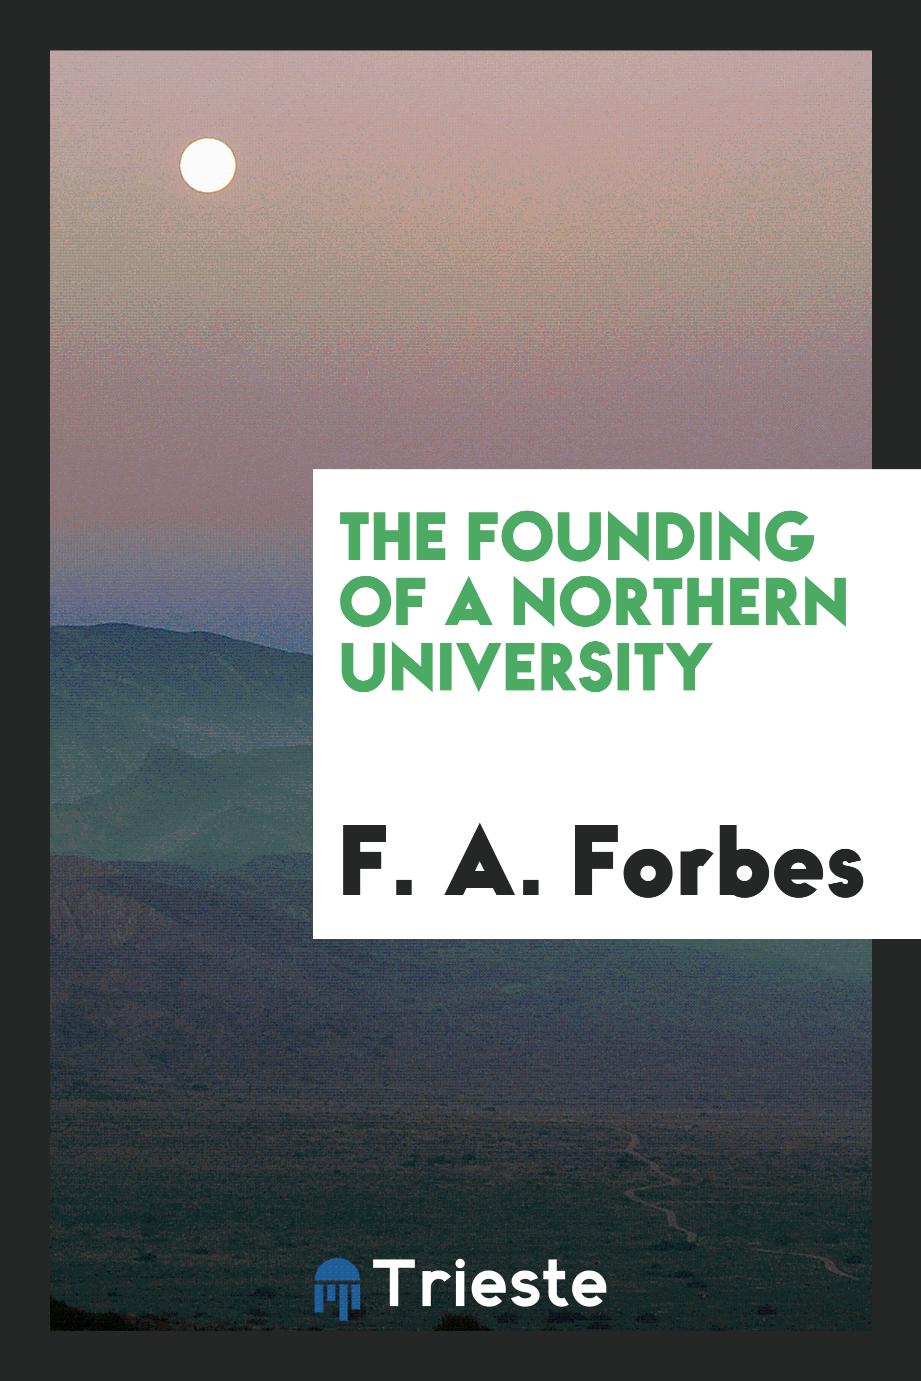 The founding of a Northern university